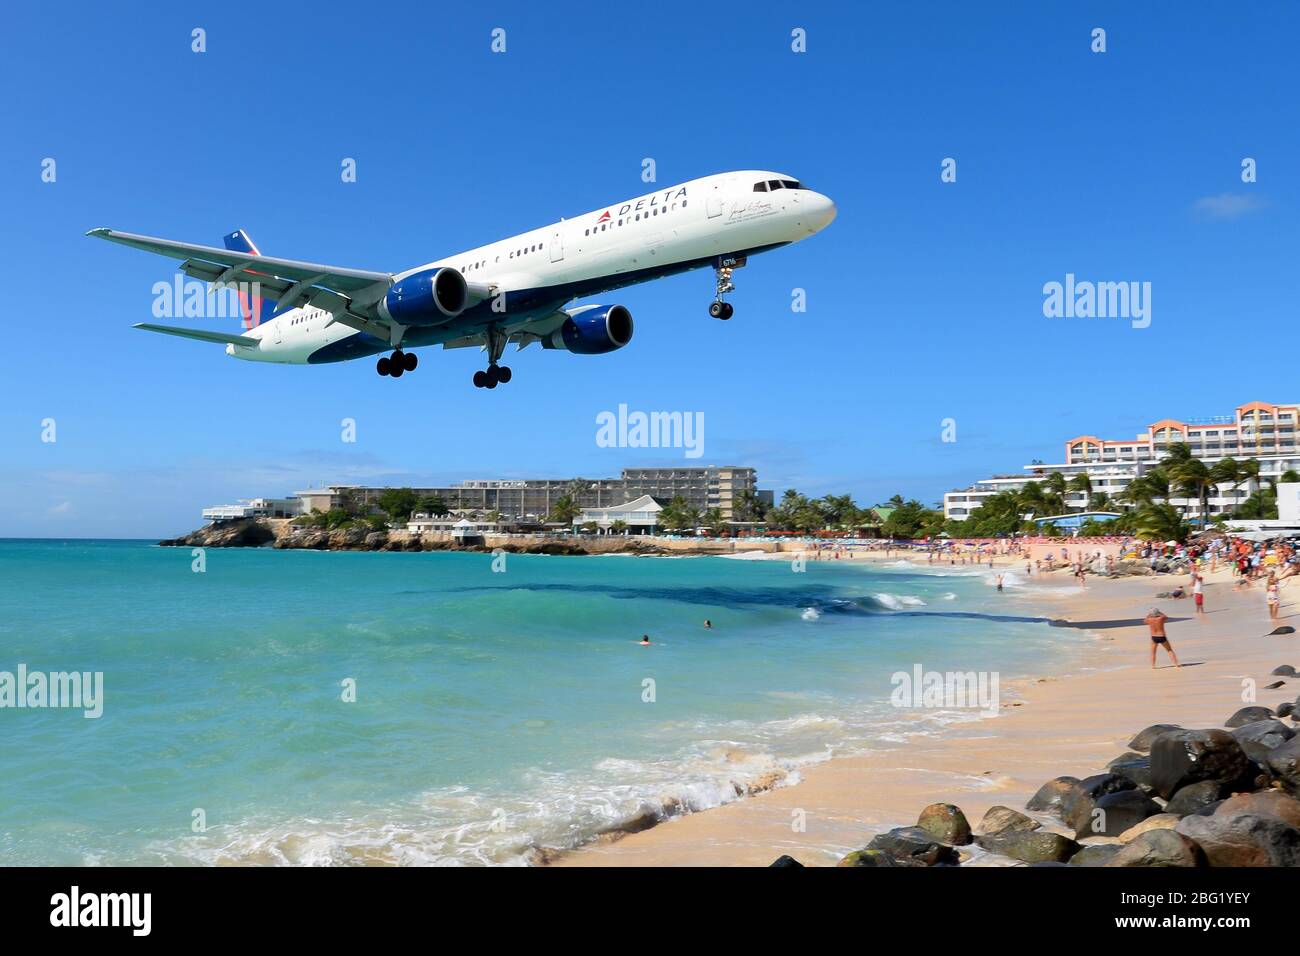 Delta Airlines Boeing 757 about to land in St Maarten airport passing over Maho Beach, famous for the airplanes passing very low. Tourist attraction. Stock Photo